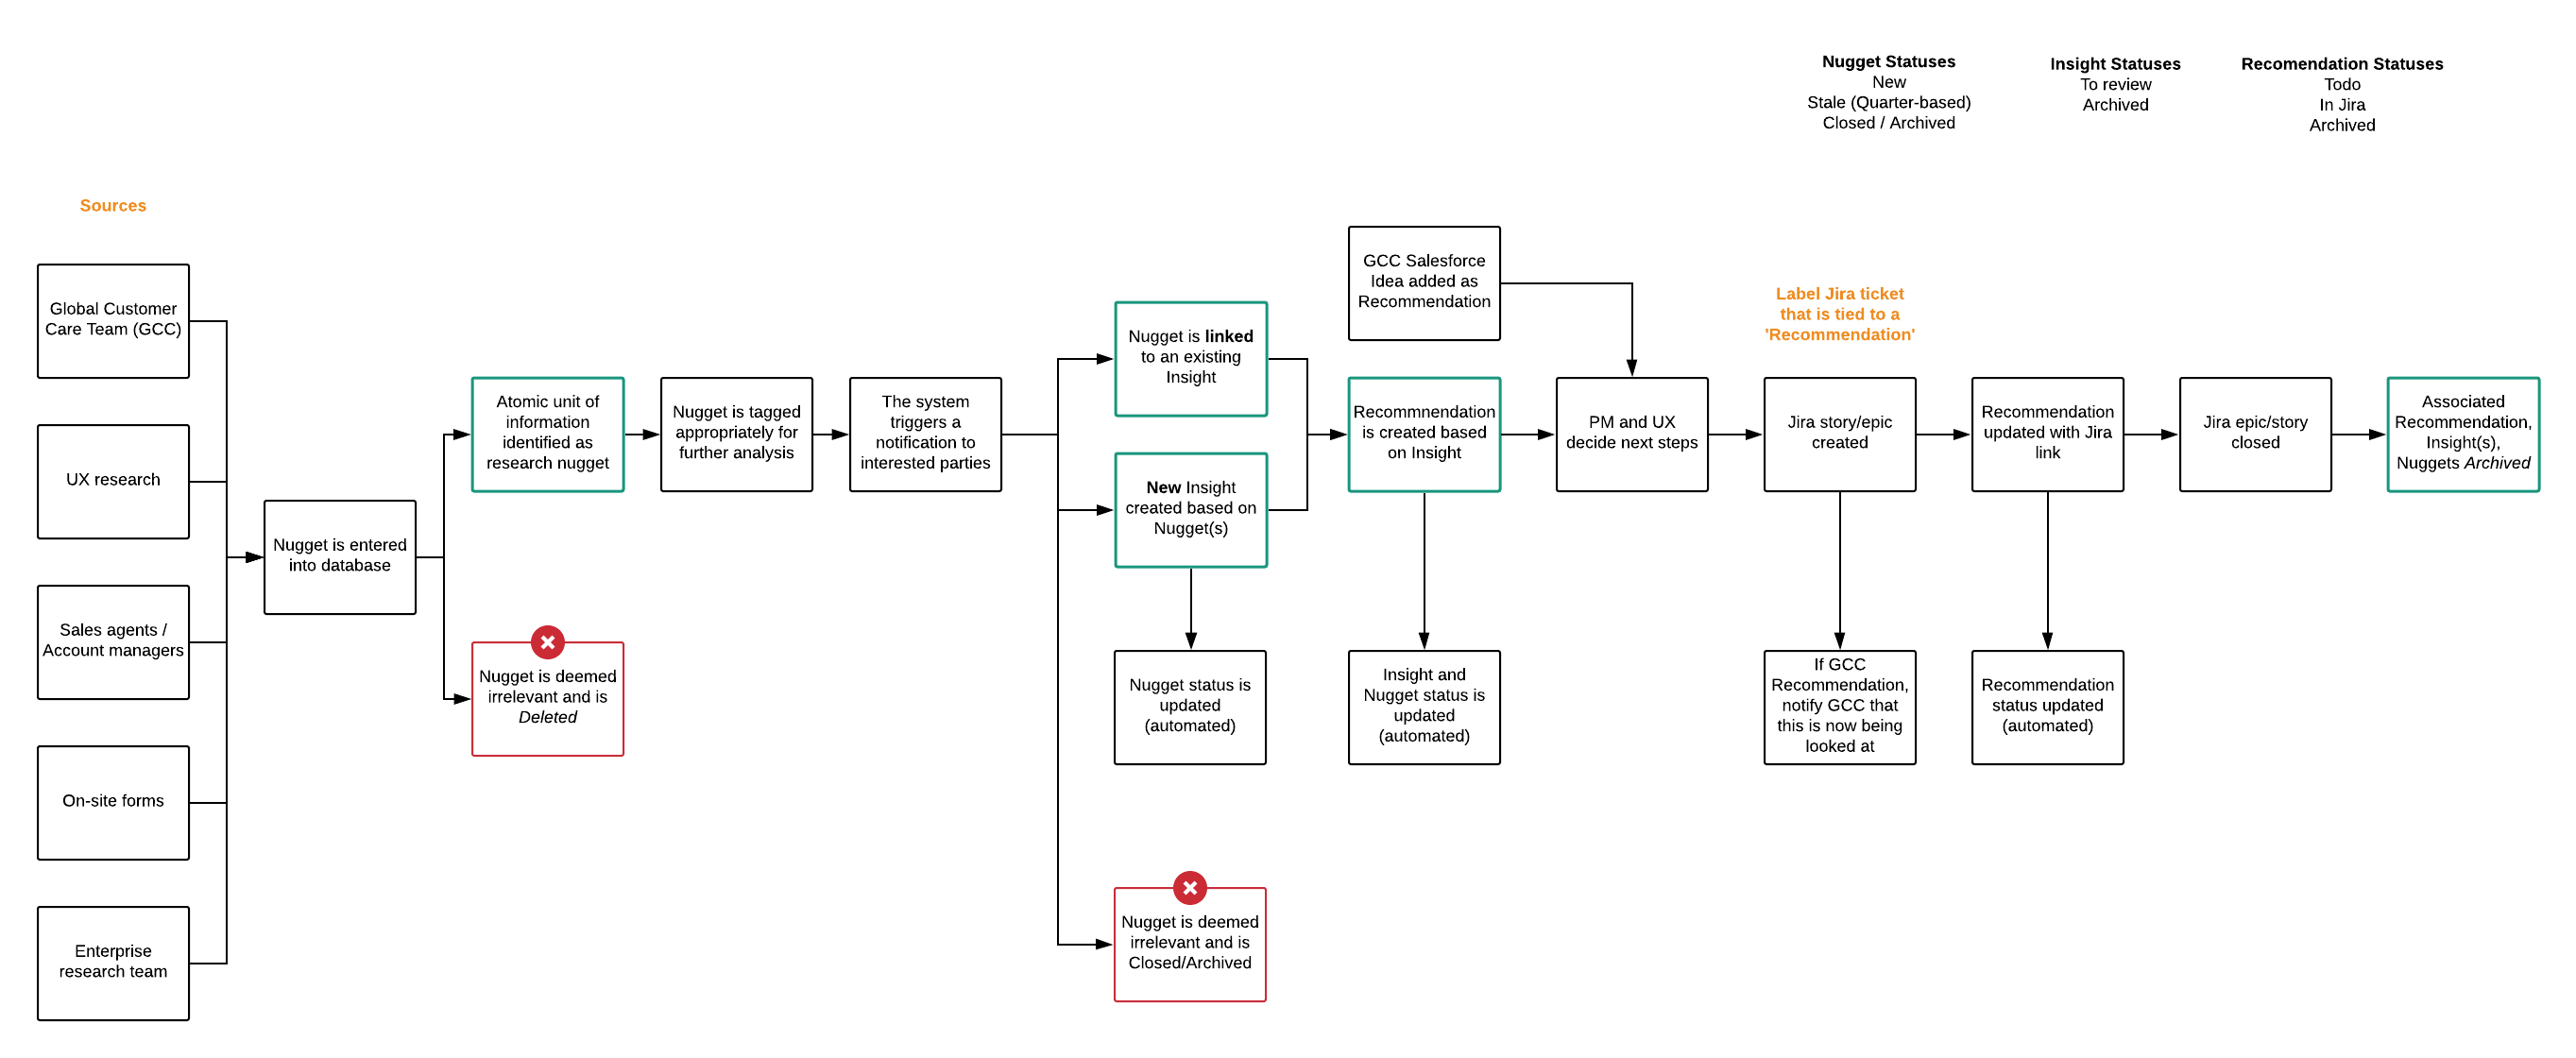 Diagram showing the research nugget lifecycle flow